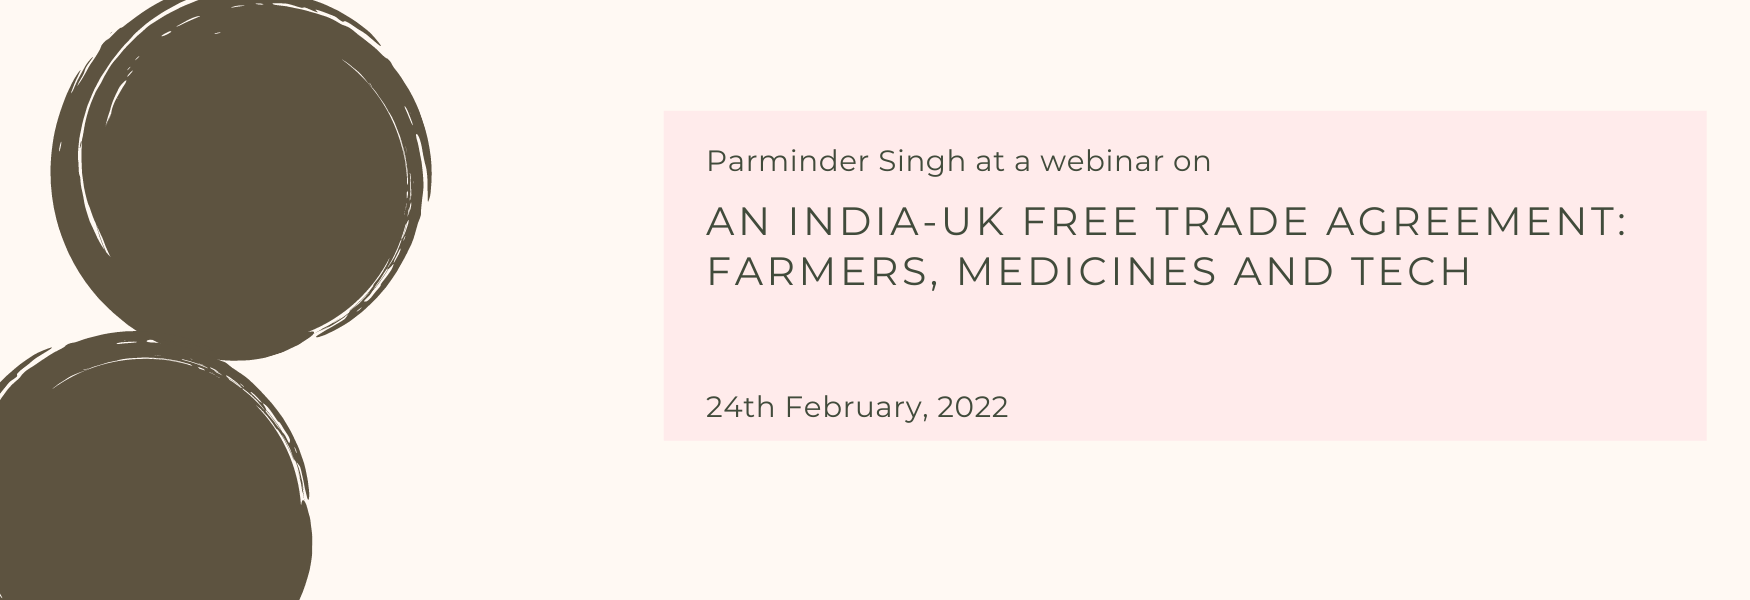 An India-UK Free trade agreement: farmers, medicines and tech